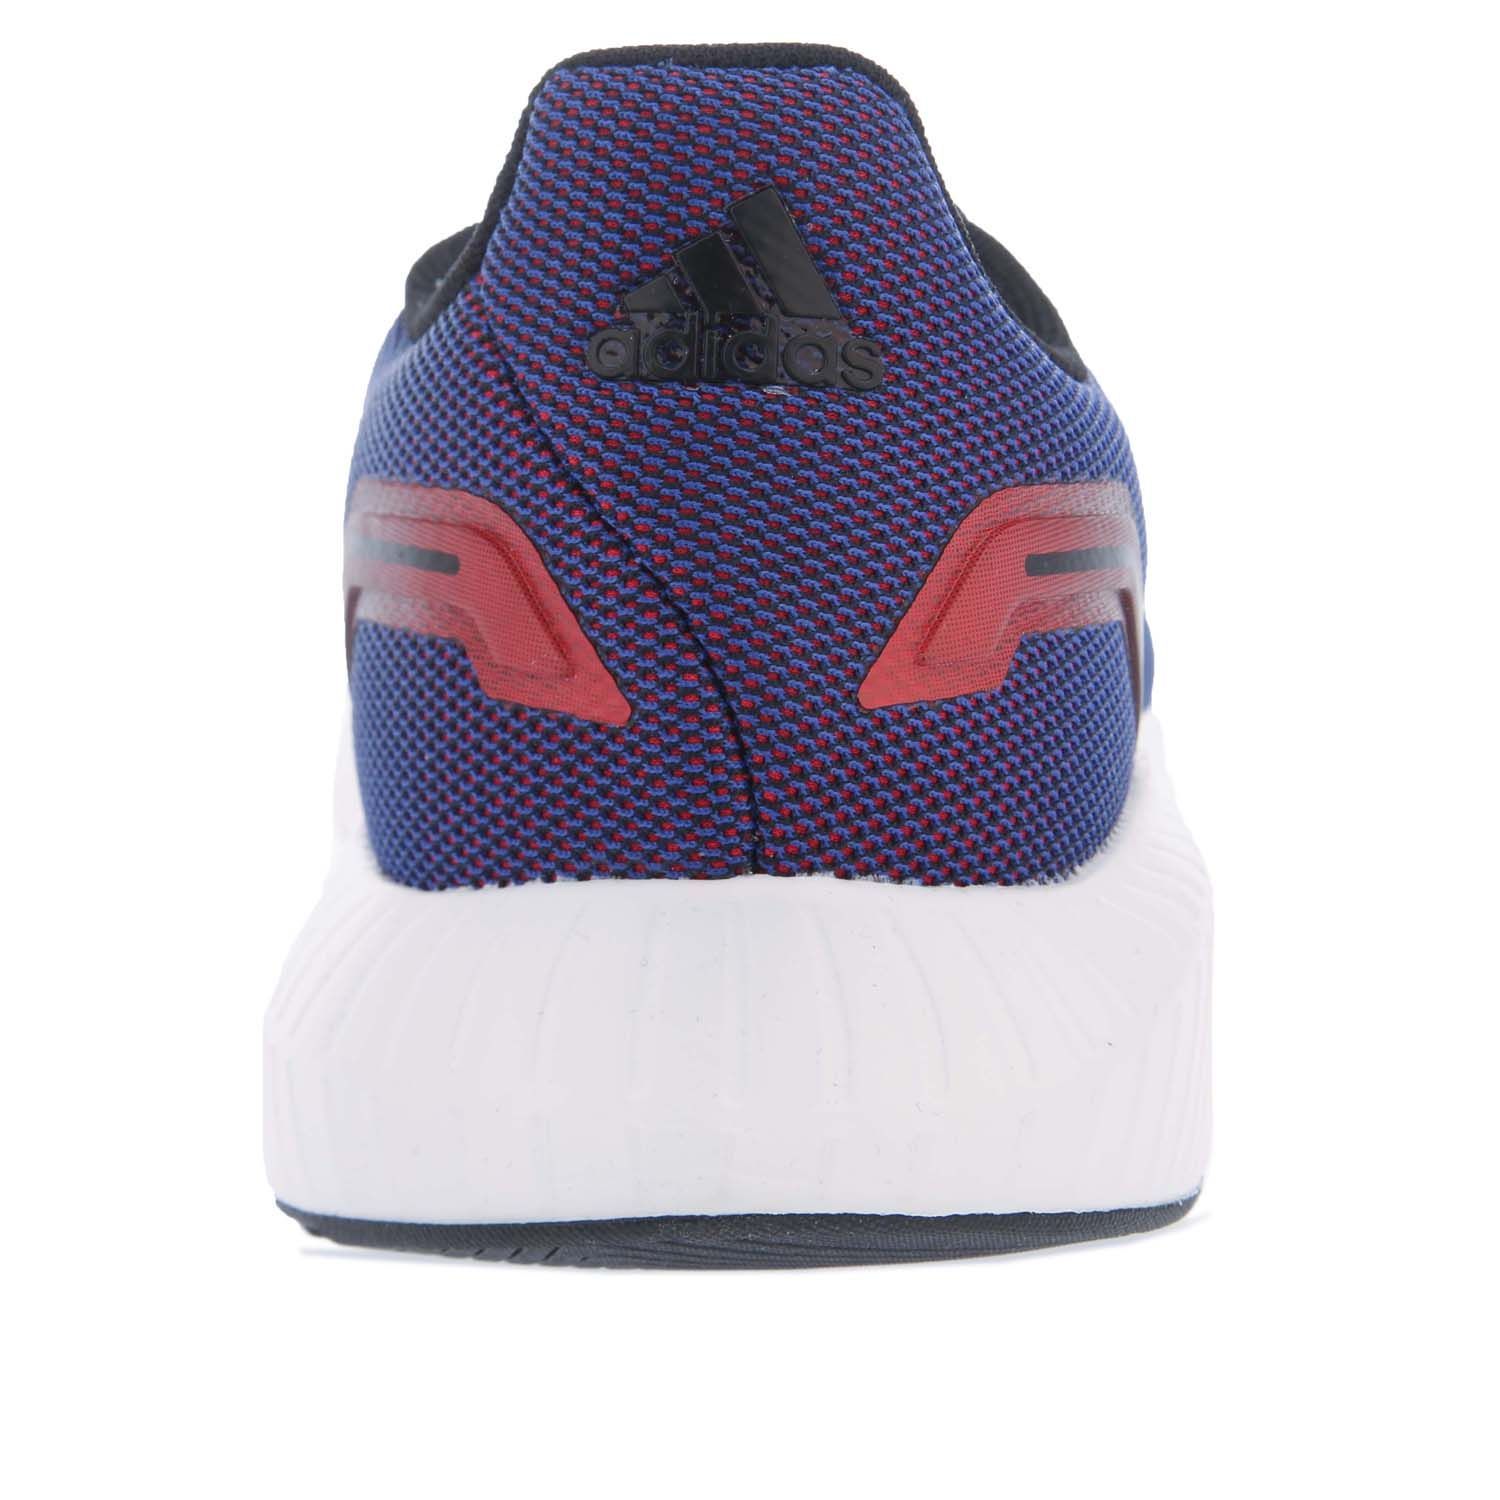 Mens adidas Runfalcon 2.0 Running Shoes in purple.- Sandwich mesh upper. - Lace closure.- Regular fit.- adidas logo on the tongue and heel.- Padded ankle collar. - Lightweight feel.- EVA midsole.- Supportive no-sew heel.- Durable outsole.- Textile and Synthetic upper  Textile lining  Synthetic sole. - Ref.: FY9627